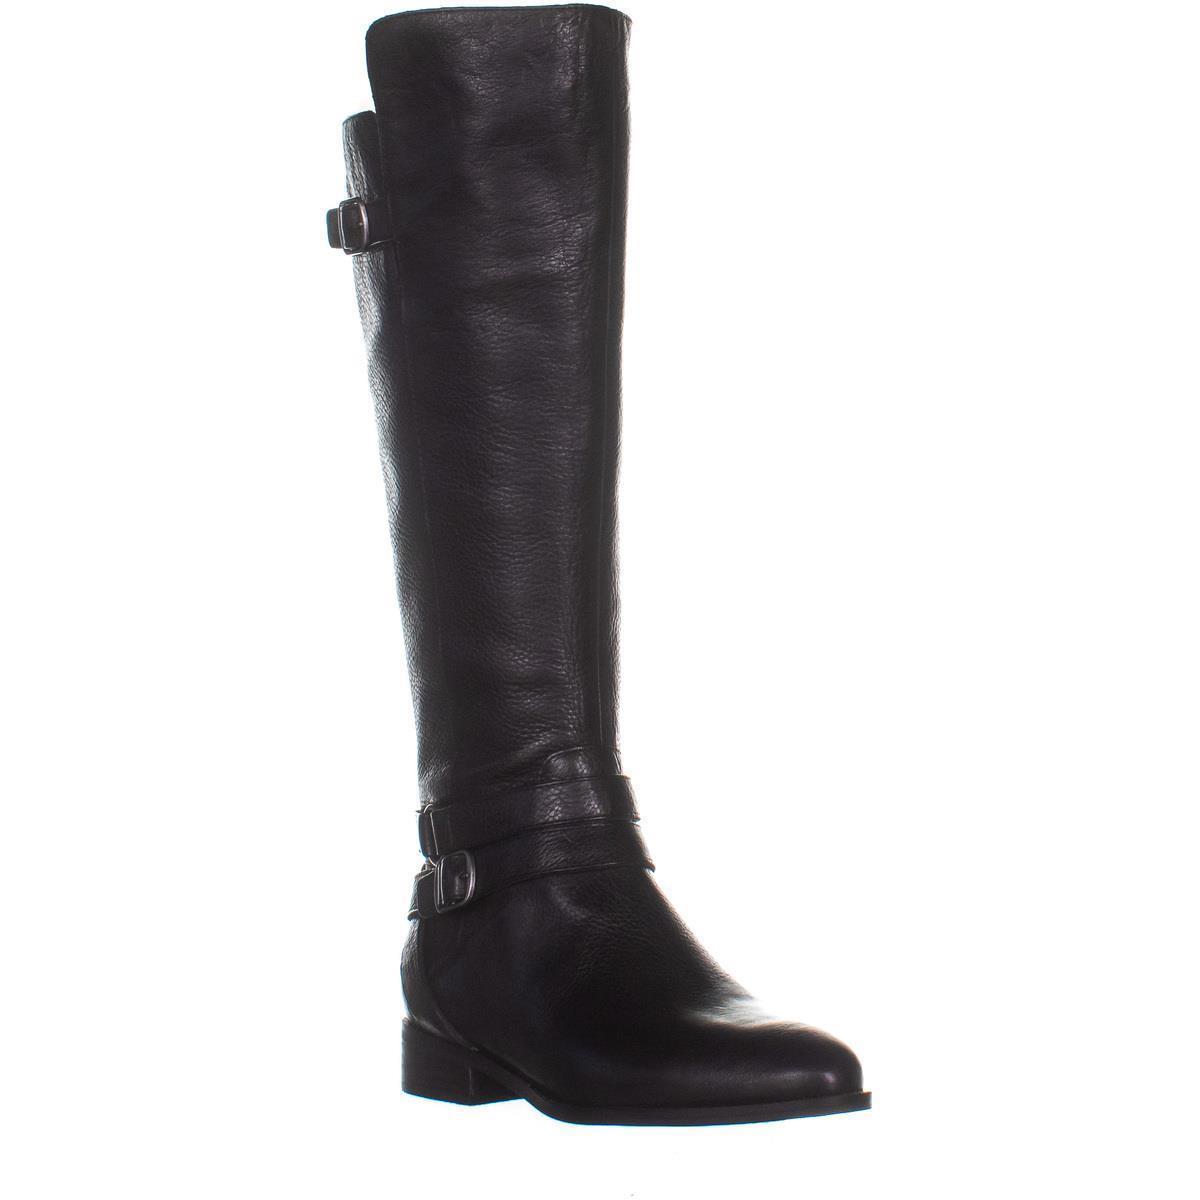 Lucky Brand Paxtreen Knee High Boots, Black - Boots